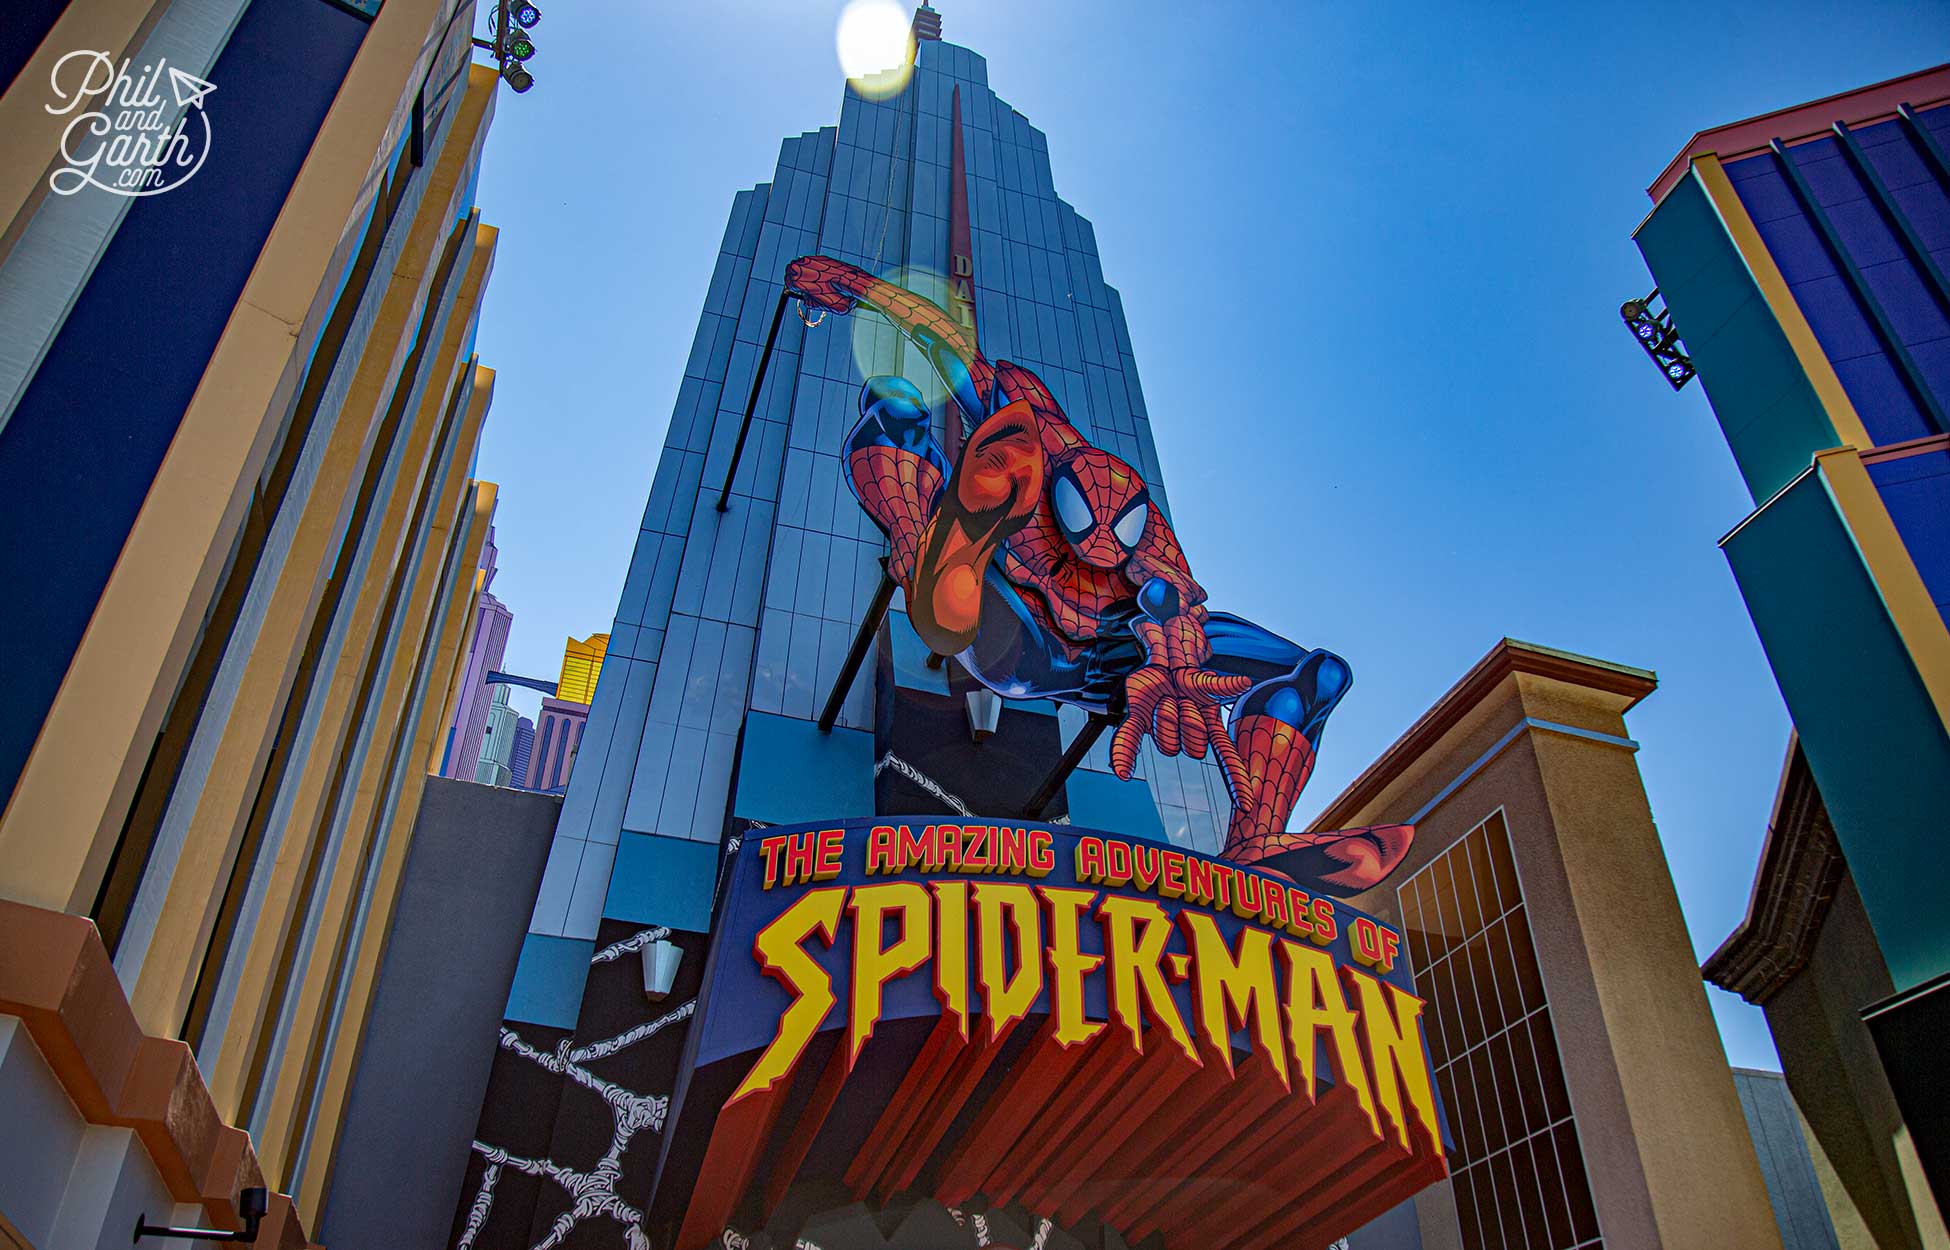 This is where you'll find the Amazing Adventures of Spider-Man ride